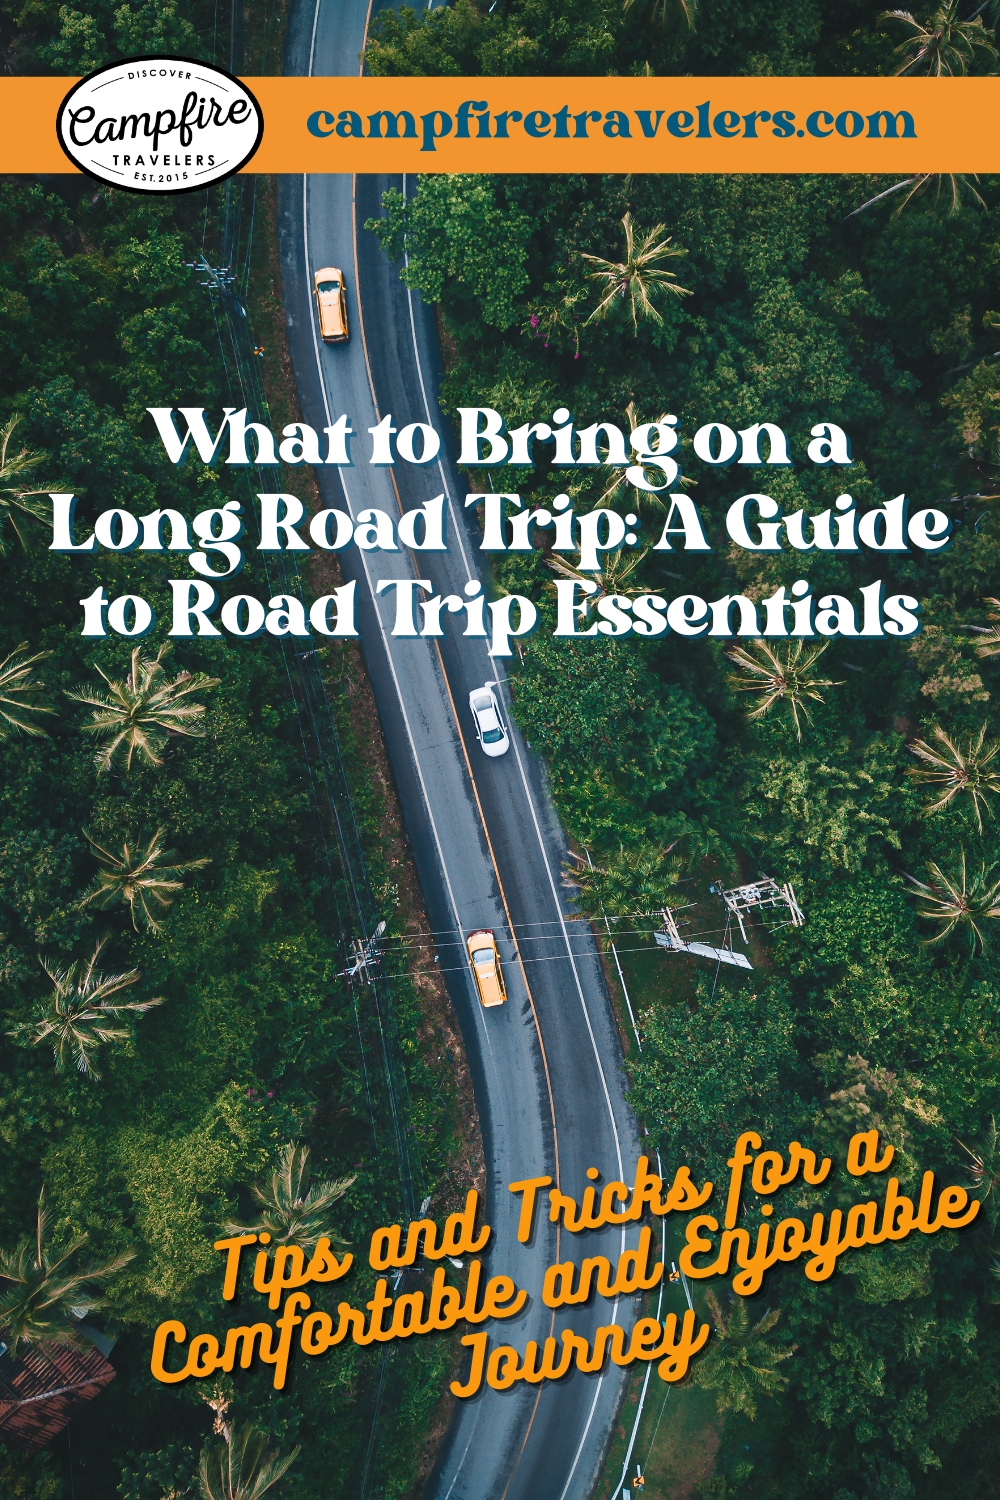 What to Bring on a Long Road Trip: A Guide to Road Trip Essentials